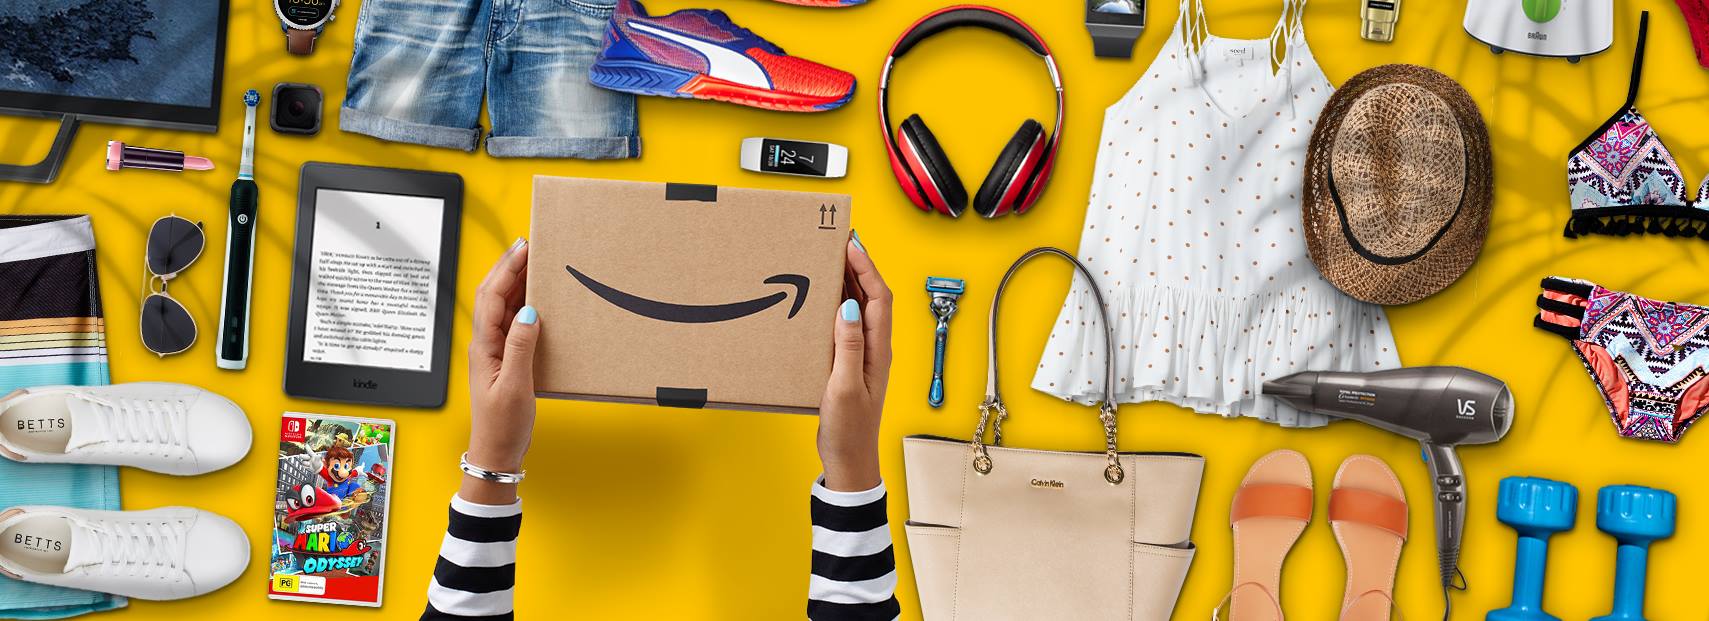 Find 100's of Amazon Daily Deals from electronics, games, fashion, beauty & more here